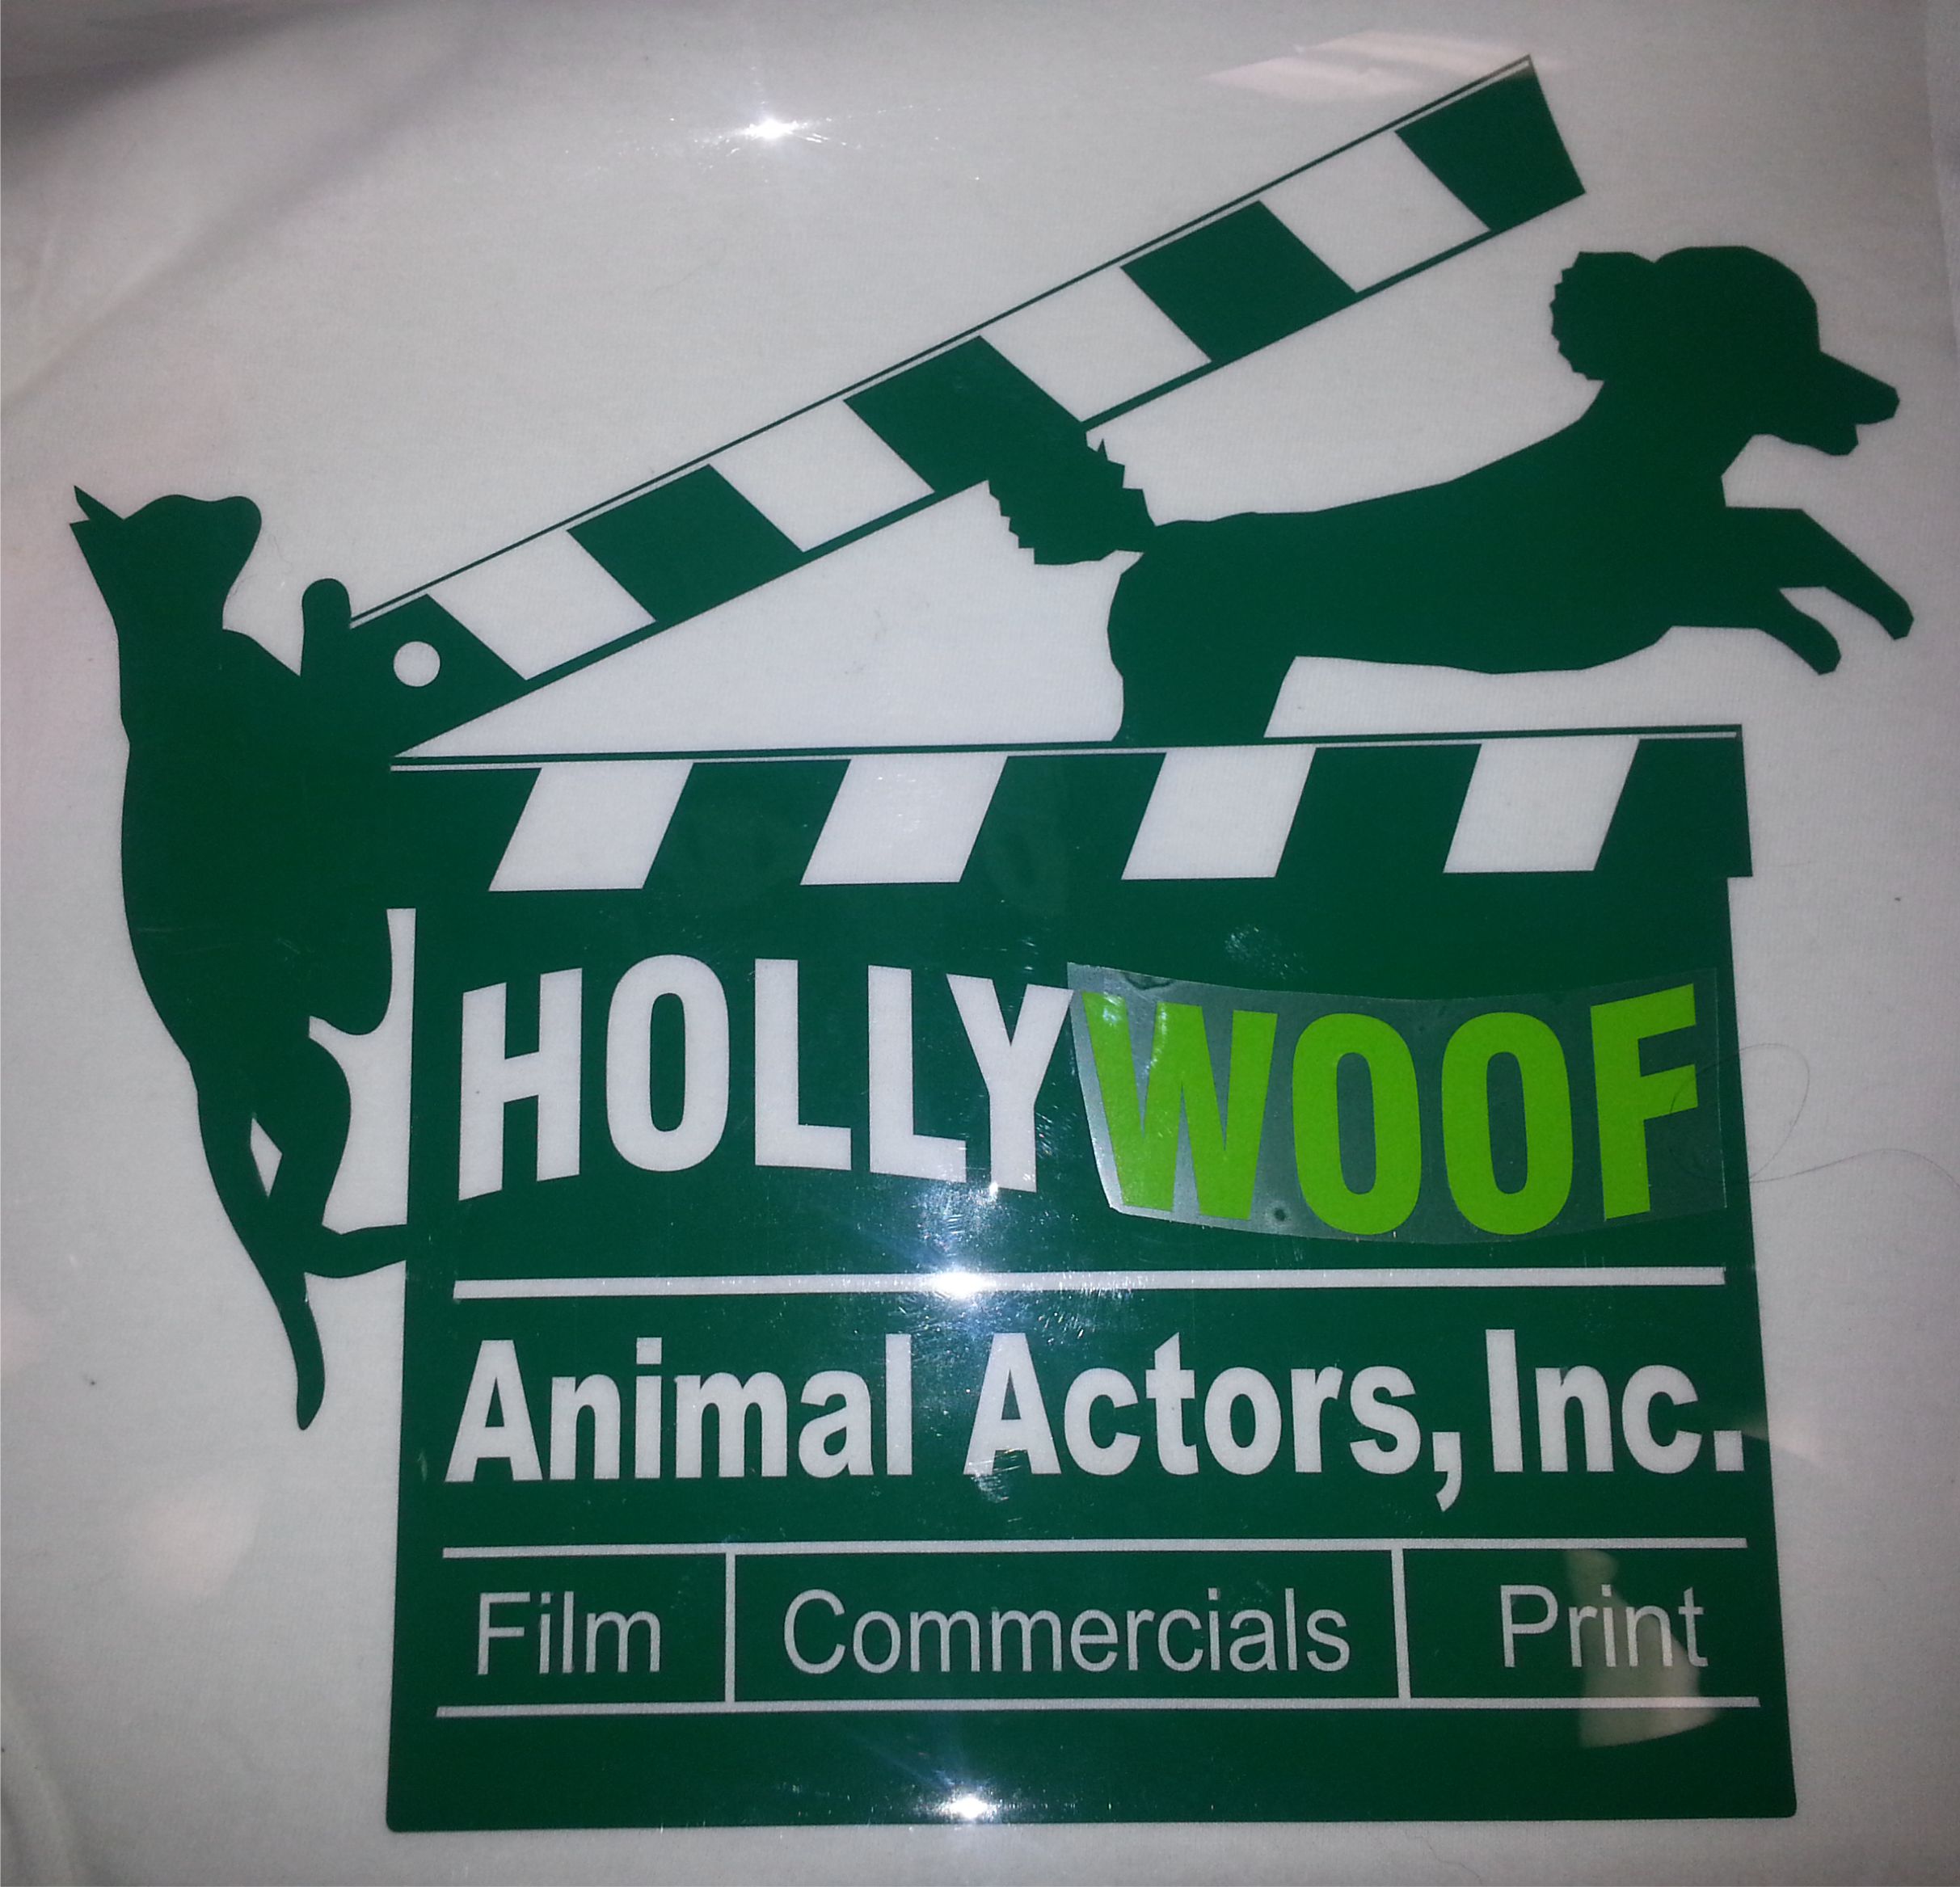 Full front Hollywoof logo